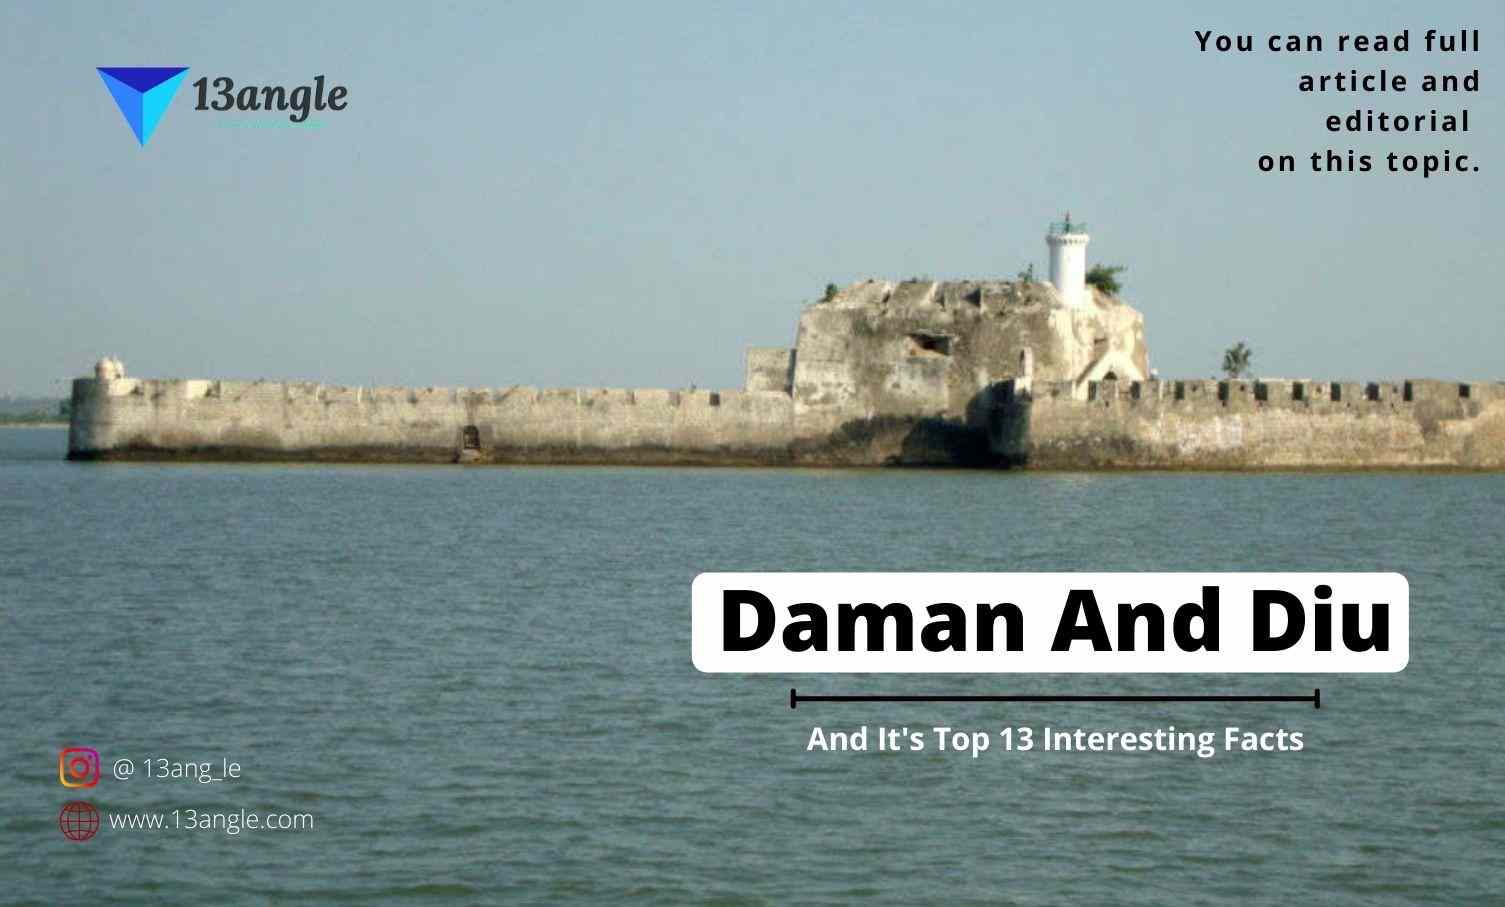 Daman And Diu And It's Top 13 Interesting Facts- 13angle.com